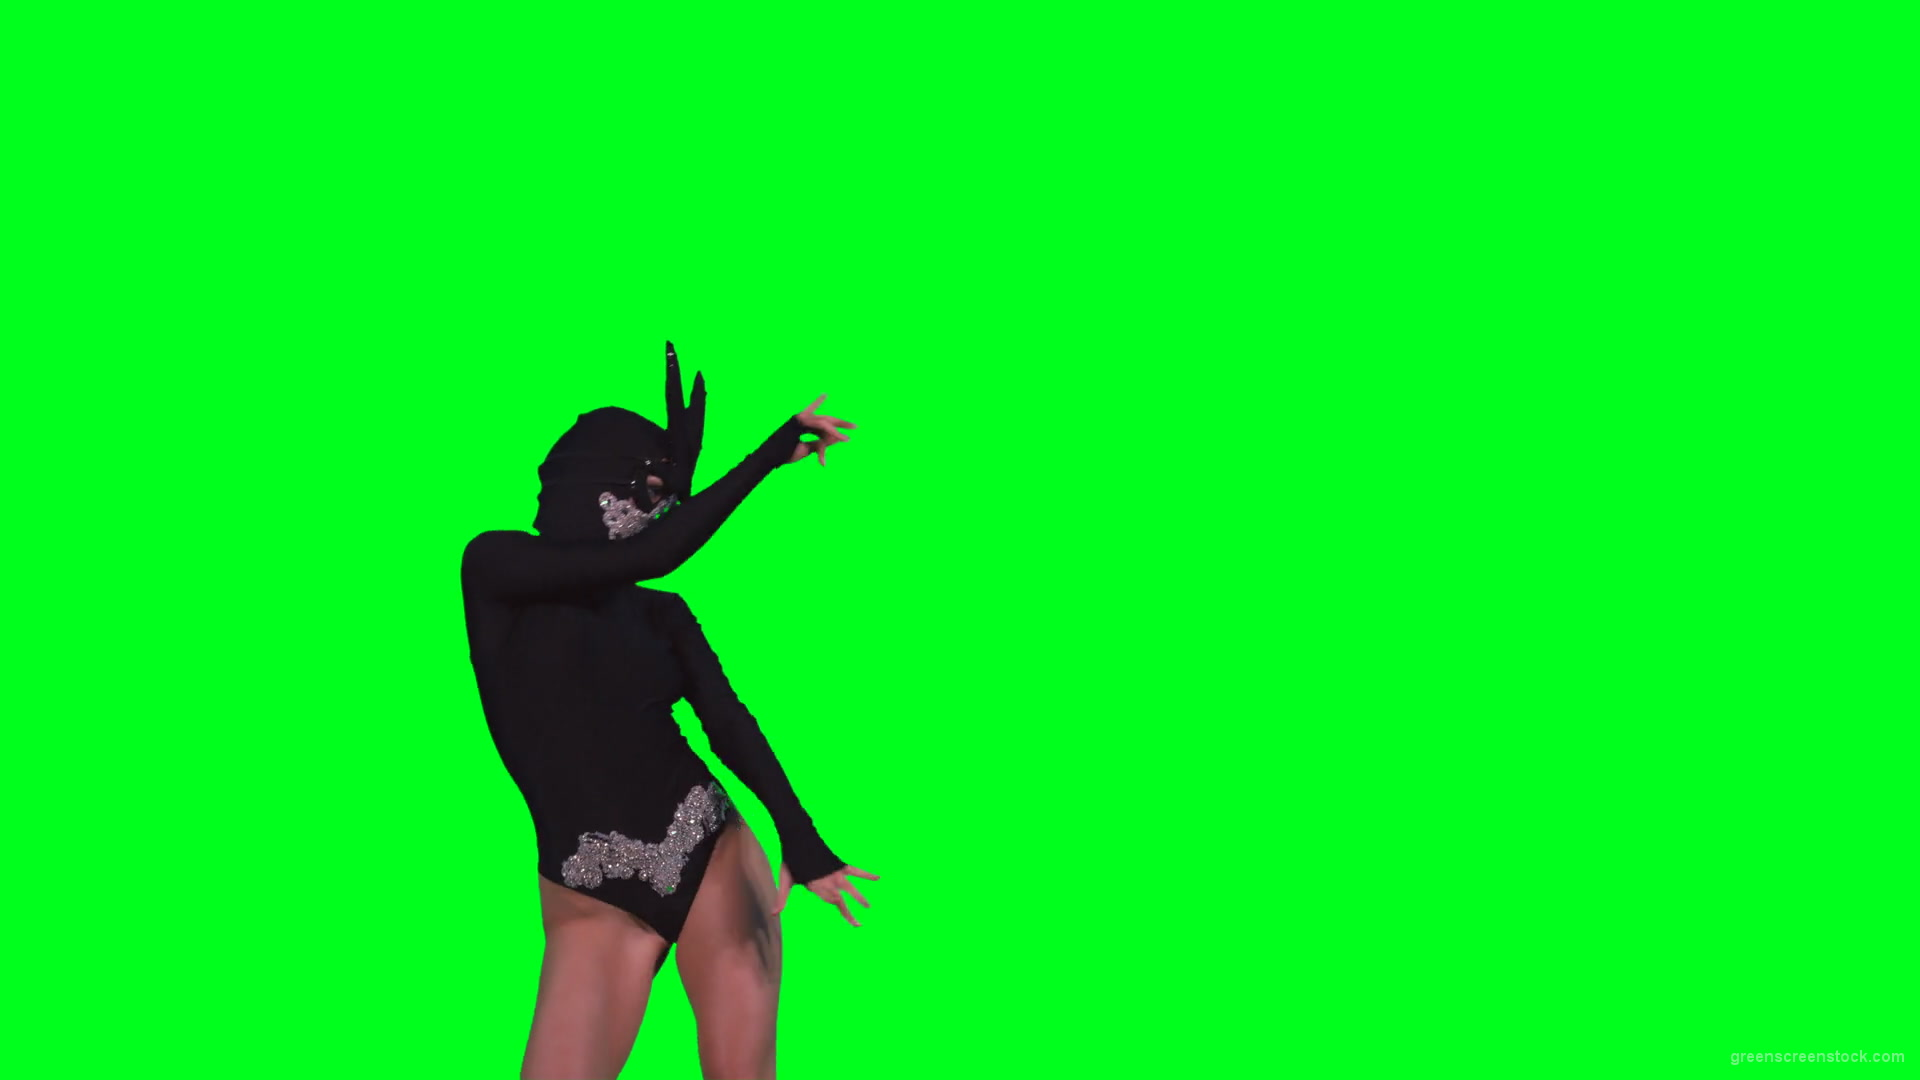 Sexy-Bunny-Girl-in-Rabbit-black-mask-chilling-with-animal-instict-isolated-on-green-screen-4K-Video-Footage-1920_006 Green Screen Stock